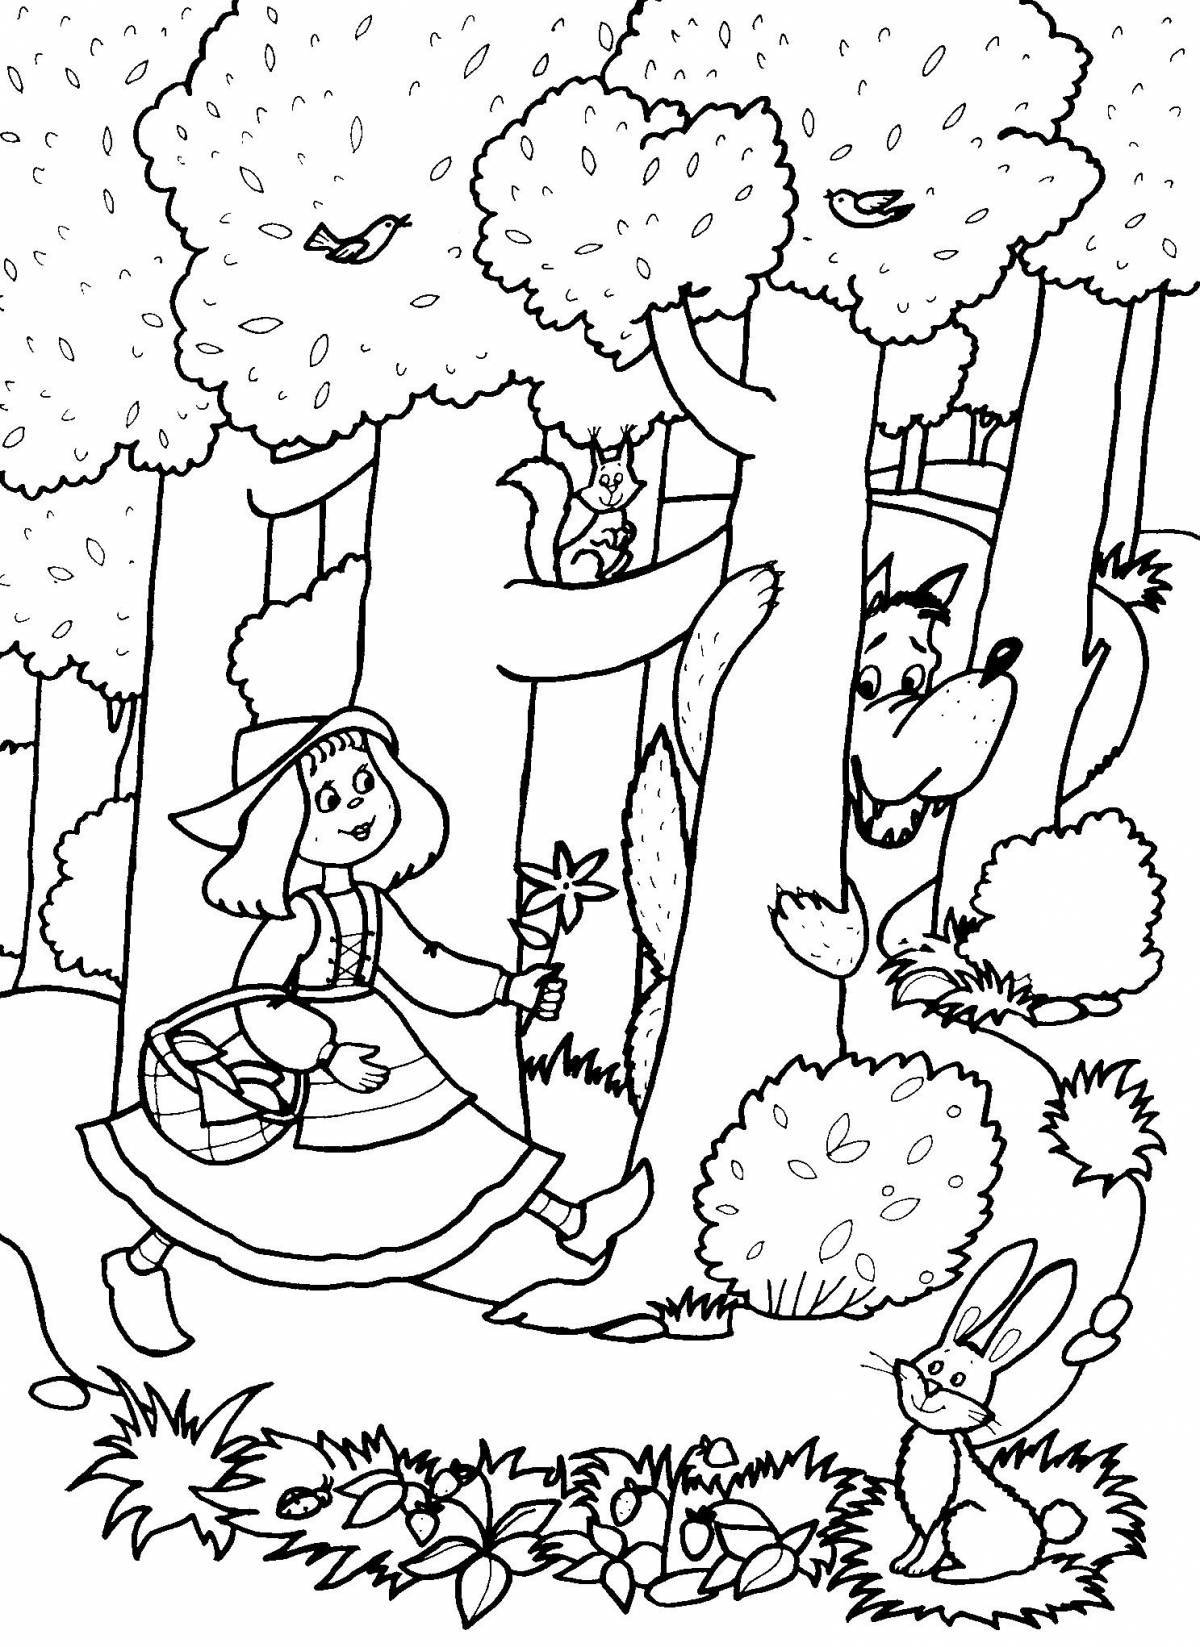 Coloring page playful little red riding hood